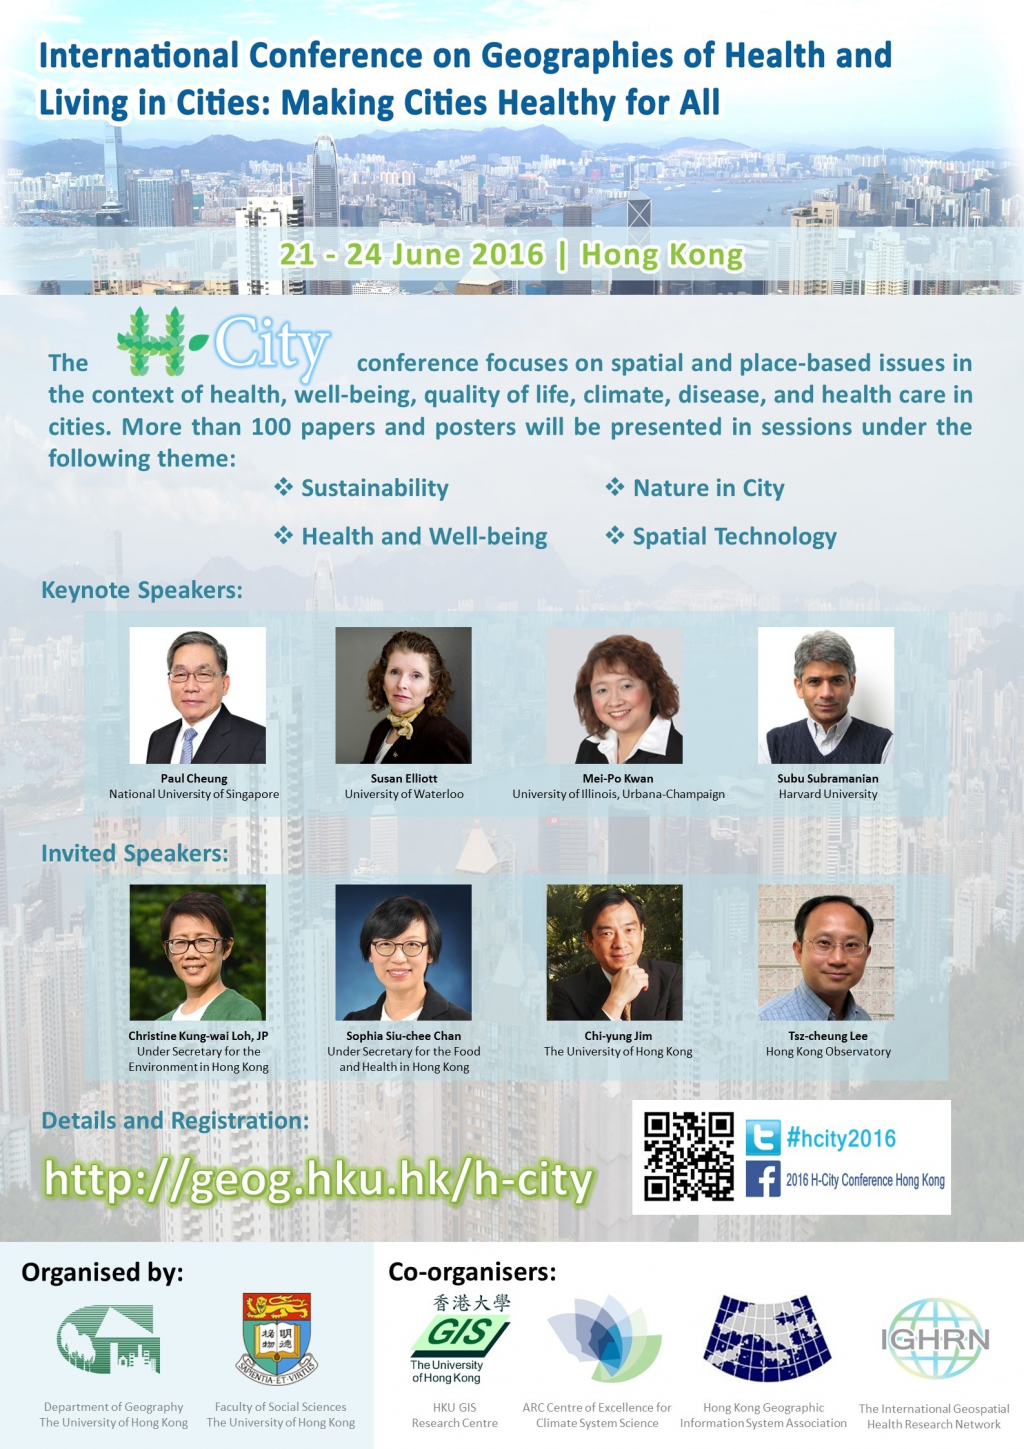 The International Conference on Geographies of Health and Living in Cities: Making Cities Healthy for All (H-City)